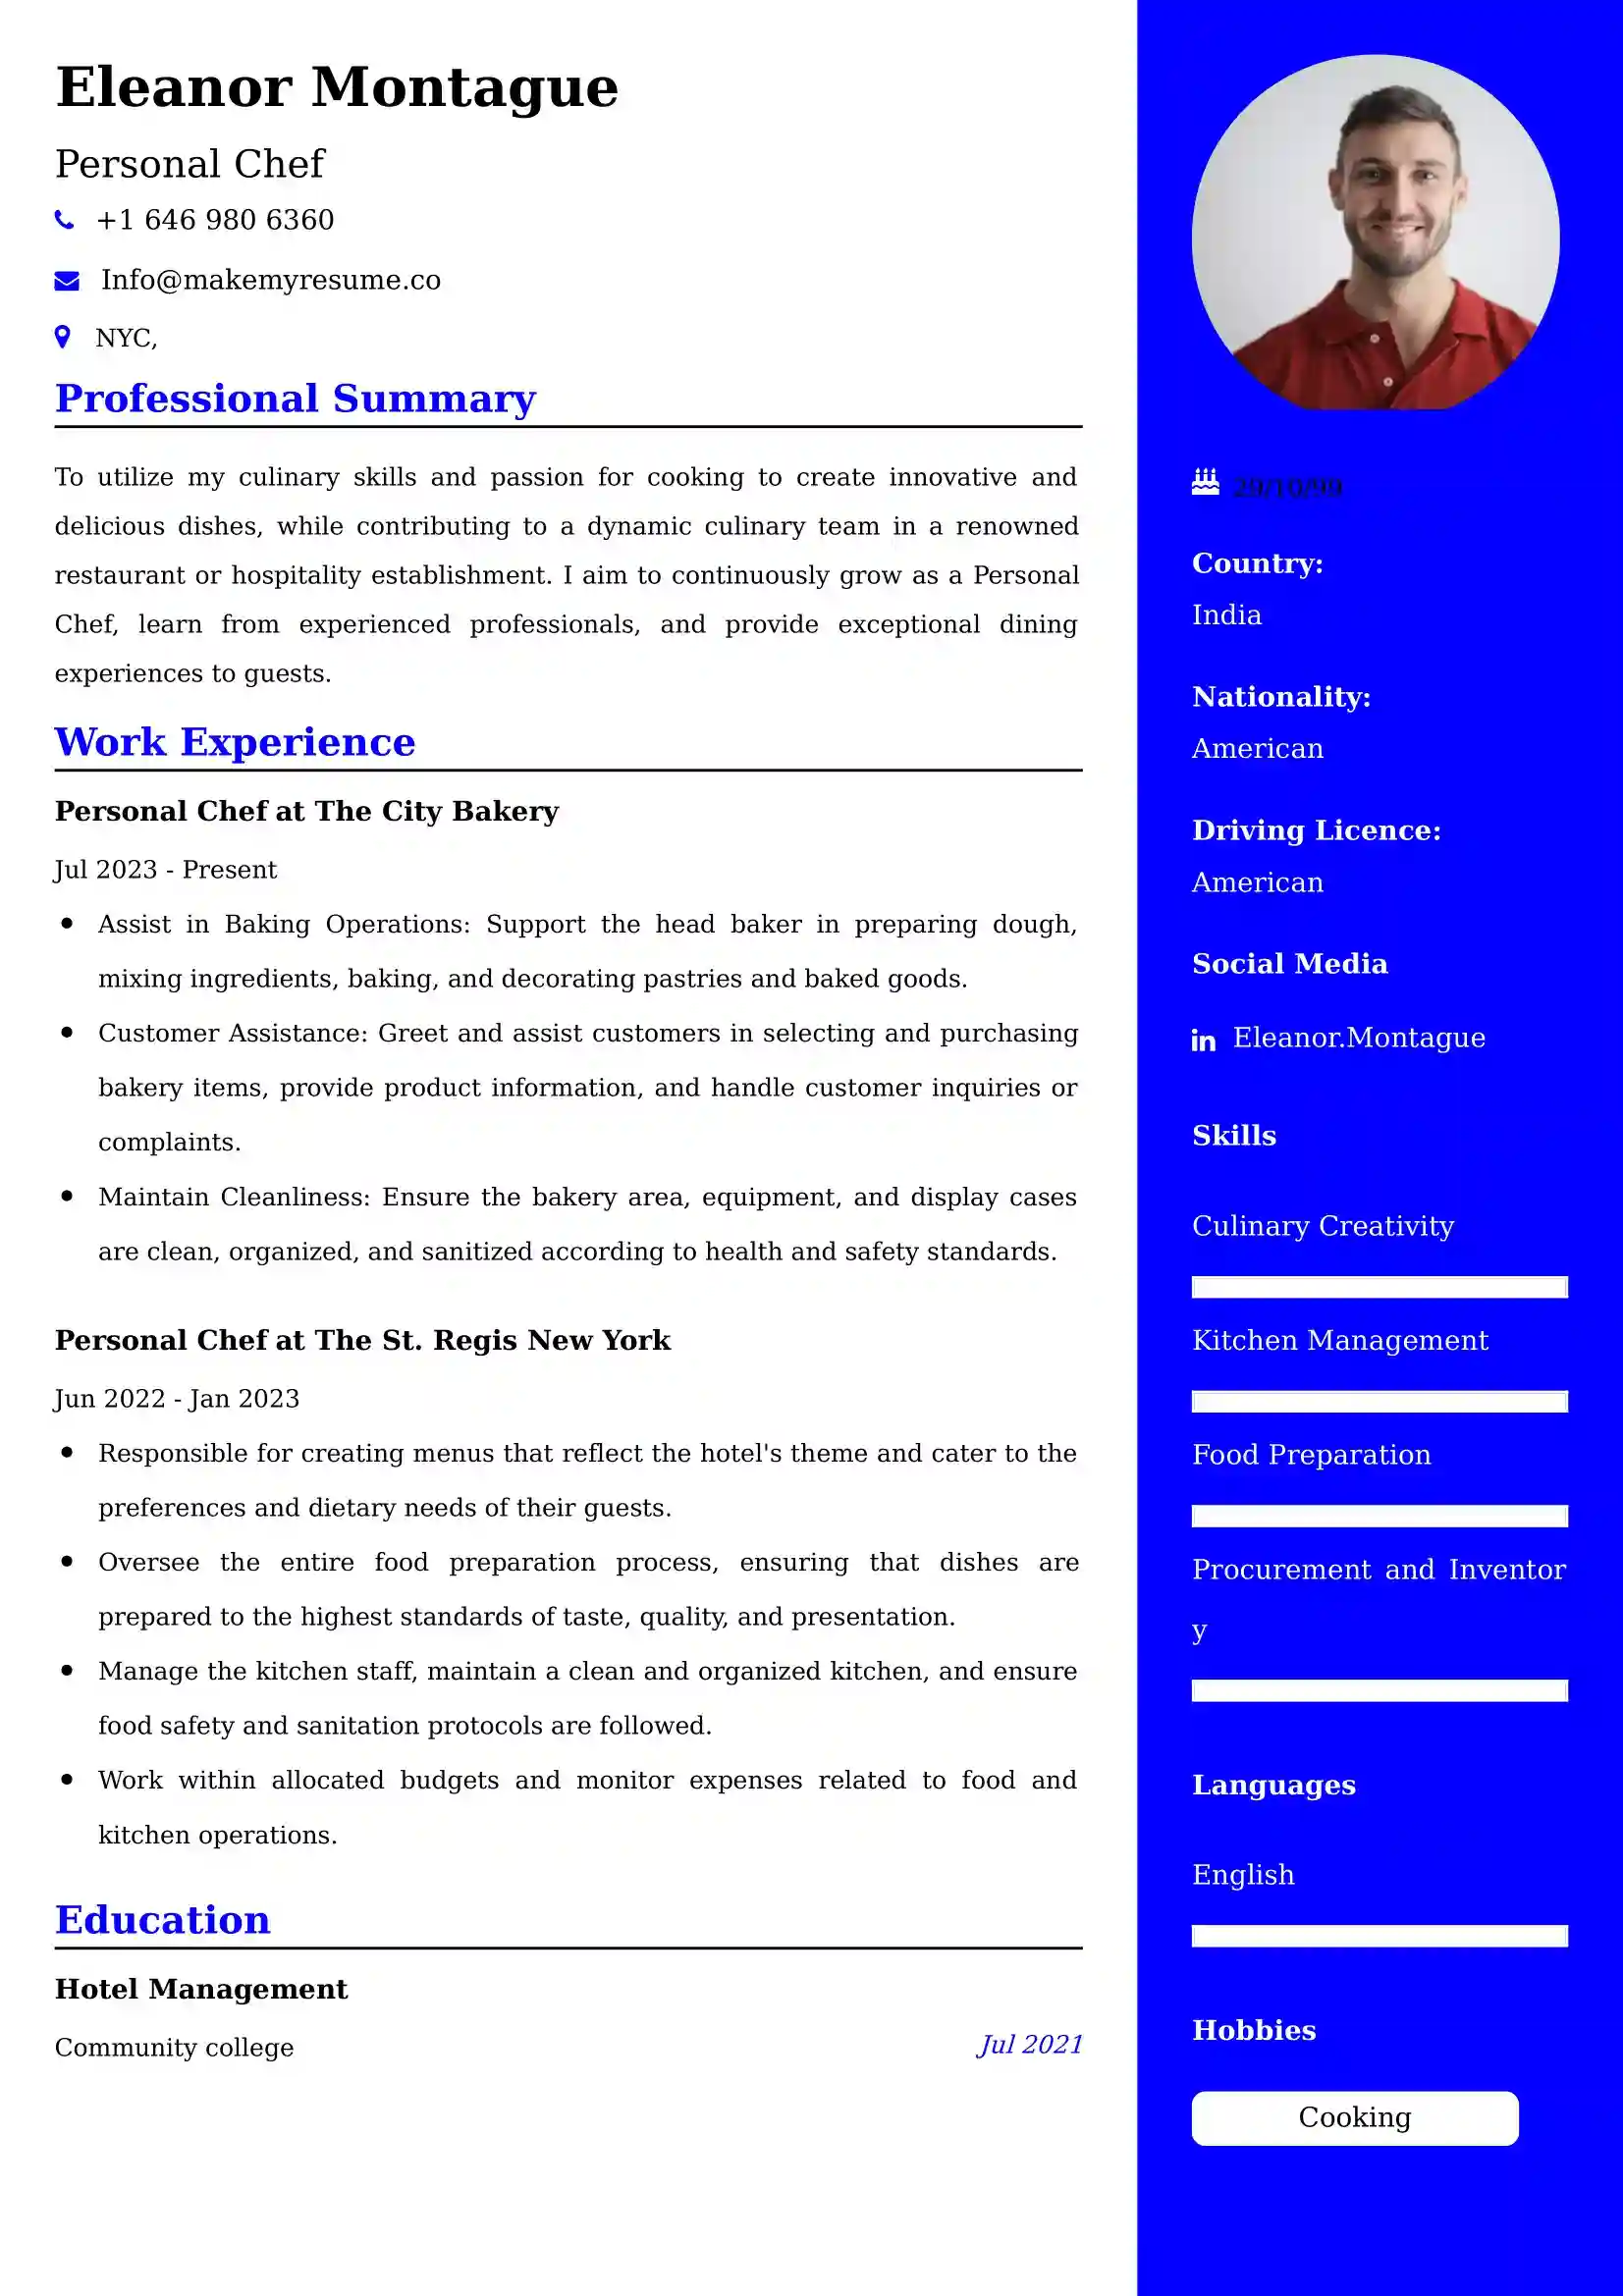 Personal Chef Resume Examples - Brazilian Format, Latest Template